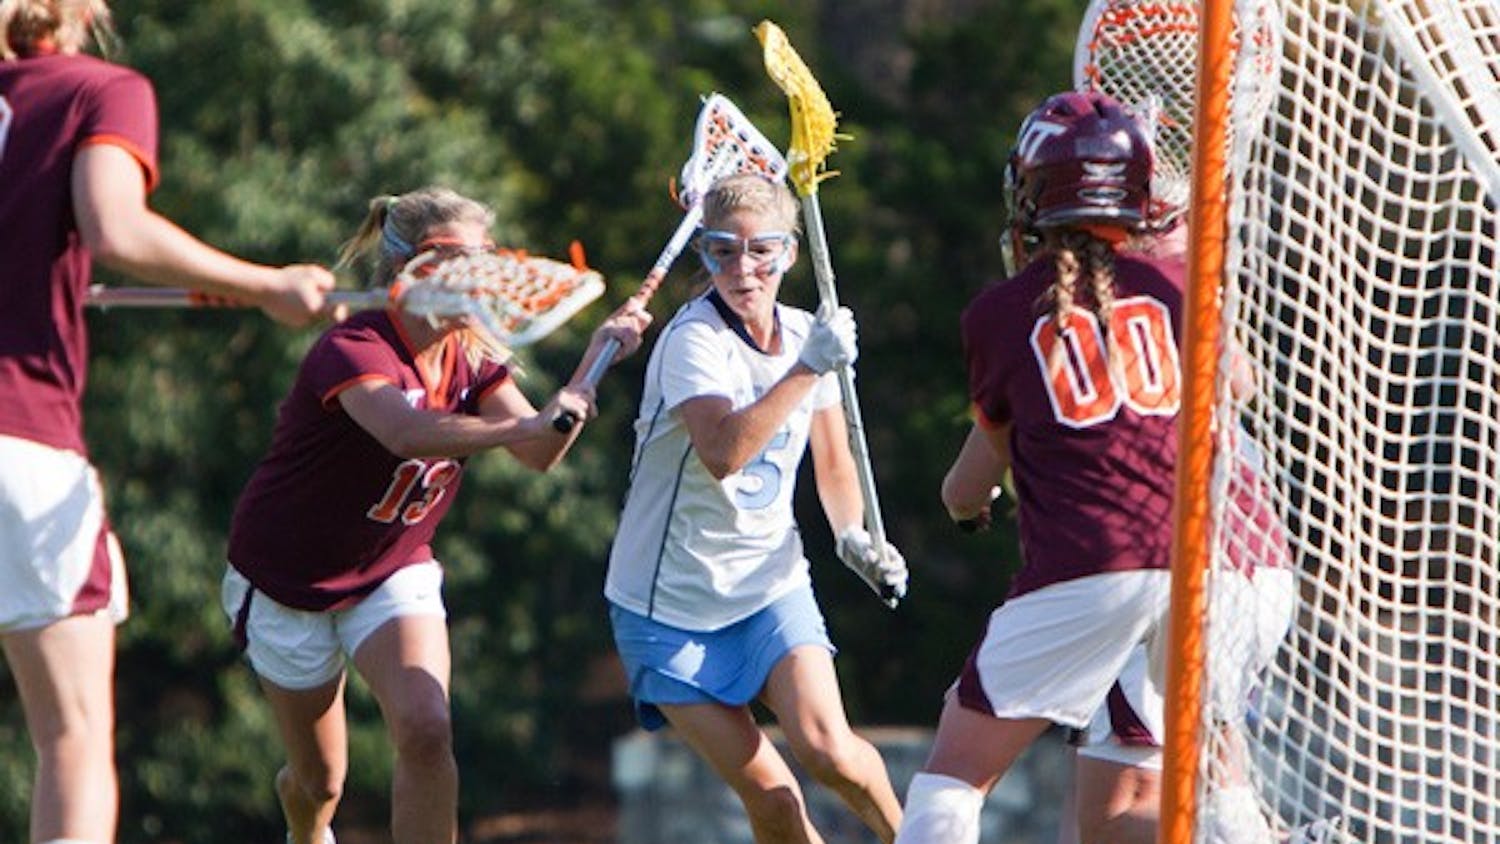 Senior attacker Kristen Taylor slices her way through the Virginia Tech defense looking to score a goal. DTH/Phong Dinh